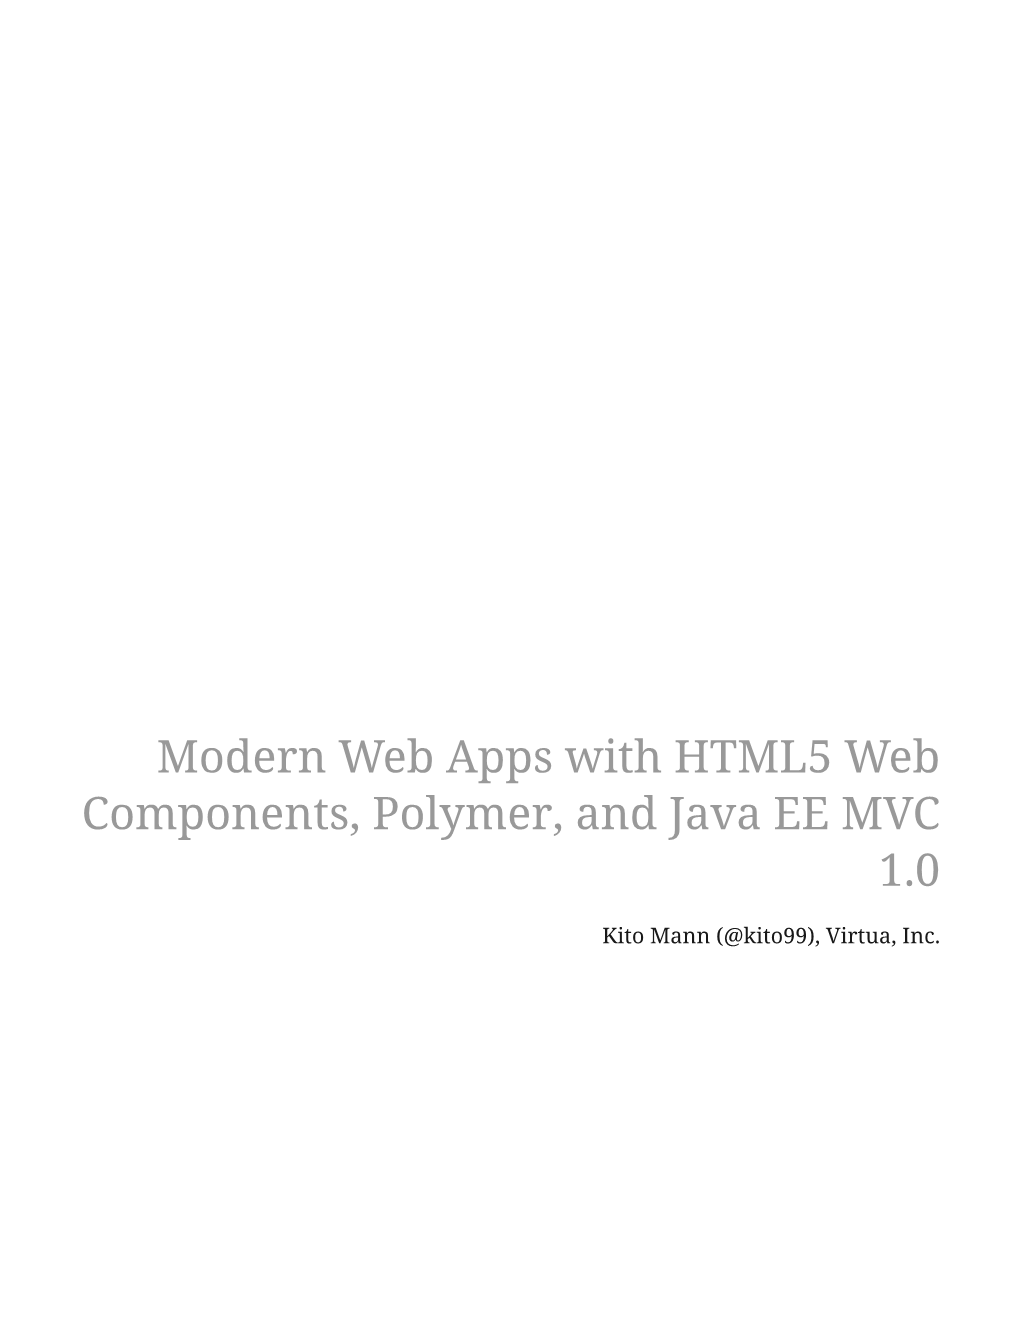 Modern Web Apps with HTML5 Web Components, Polymer, and Java EE MVC 1.0